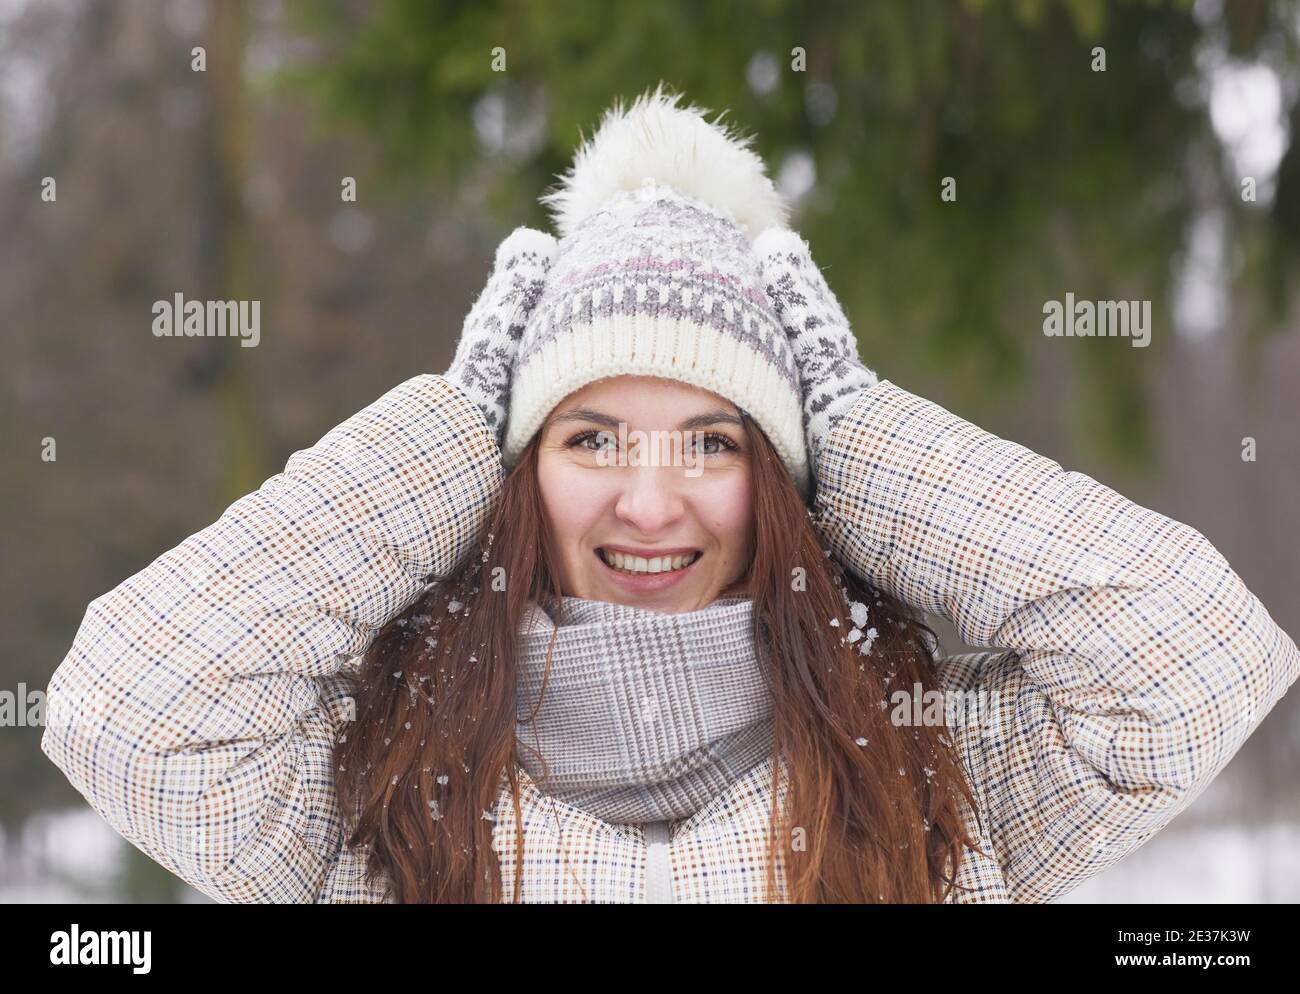 Front view portrait of happy young woman in winter outdoors wearing knit hat and mittens while smiling at camera covered in snow Stock Photo